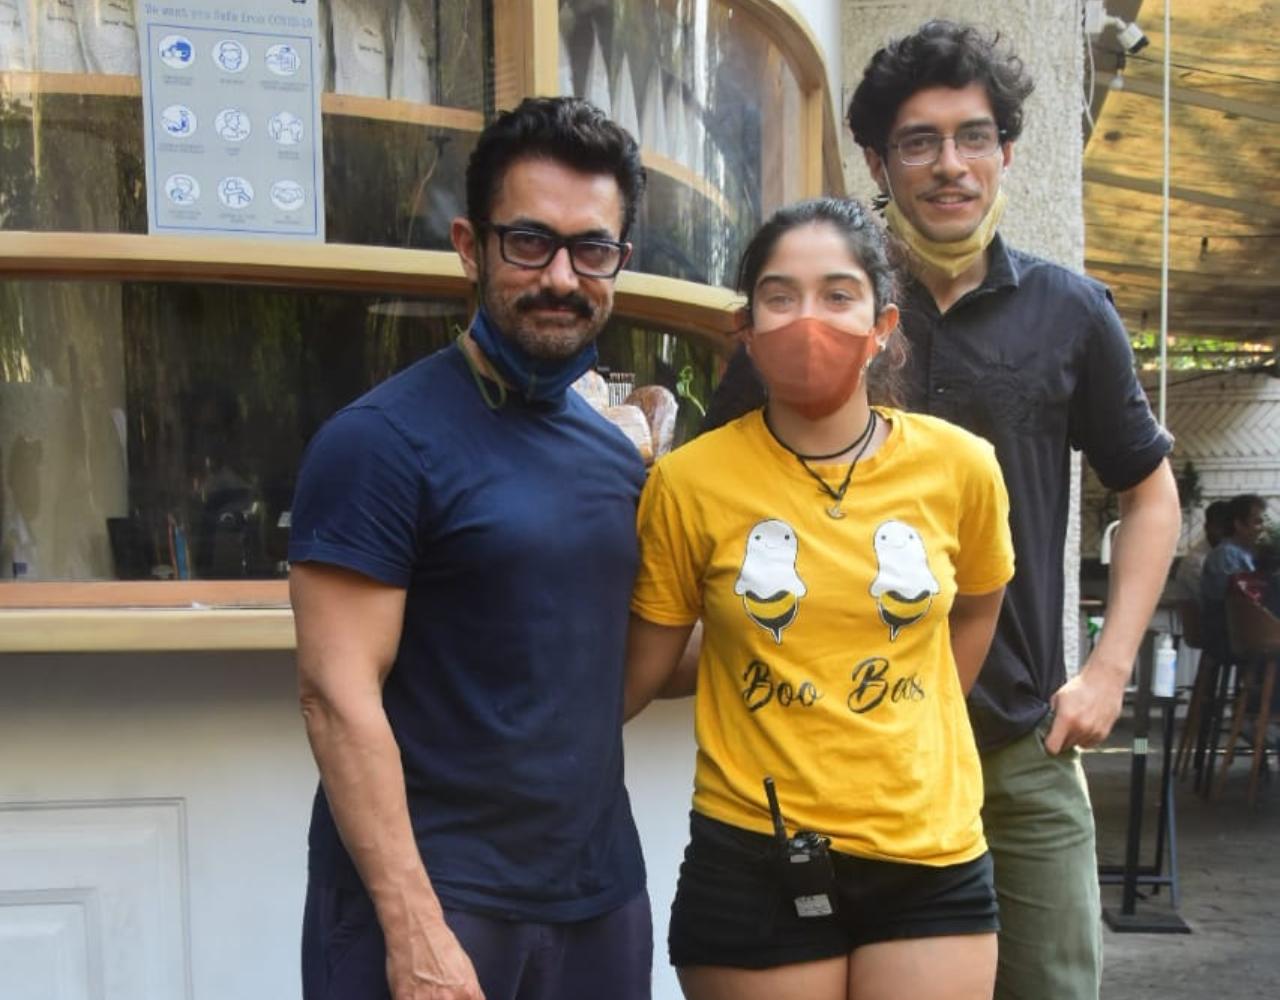 Aamir Khan was snapped by the photographers enjoying a family lunch in Bandra, Mumbai. The actor was spotted with his daughter Ira Khan and son Junaid Khan. They were all smiles posing for the shutterbugs present there. While Aamir looked handsome in his casual t-shirt and pants, Ira looked cute in her yellow t-shirt and black shorts. (All pictures: Yogen Shah).